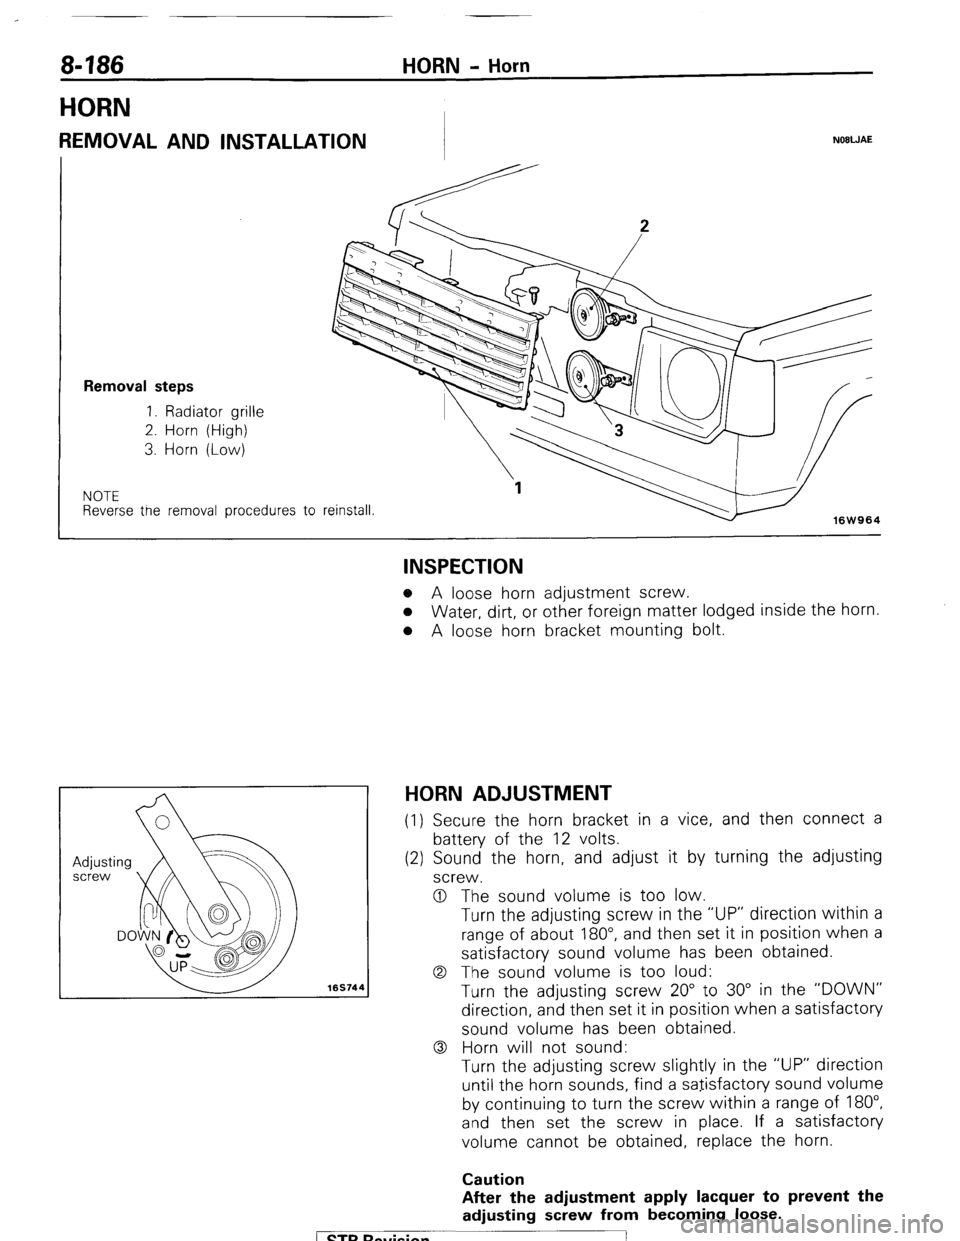 MITSUBISHI MONTERO 1987 1.G Workshop Manual 8486 HORN - Horn 
HORN 
REMOVAL AND INSTALLATION NOBWAE 
Removal steps 
1. Radiator grille 
2. Horn (High) 
3. Horn (Low) 
NOTE Reverse tne removal procedures to 
reinstall. 
16W964 
169744 
INSPECTIO